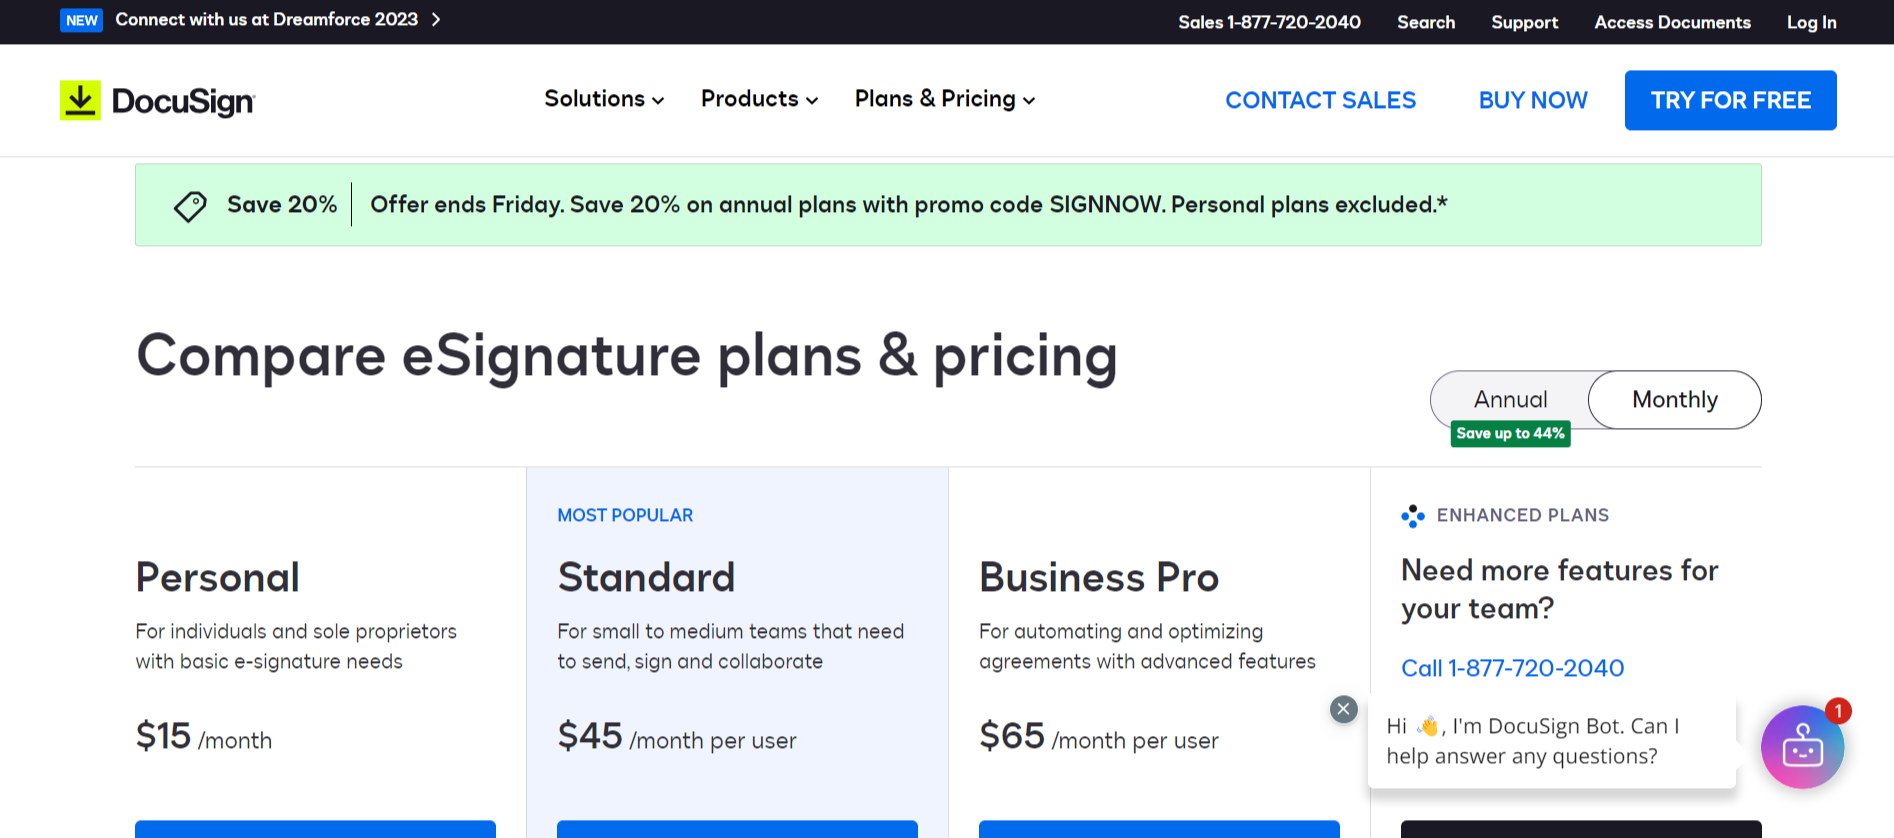 DocuSign Price and Plans